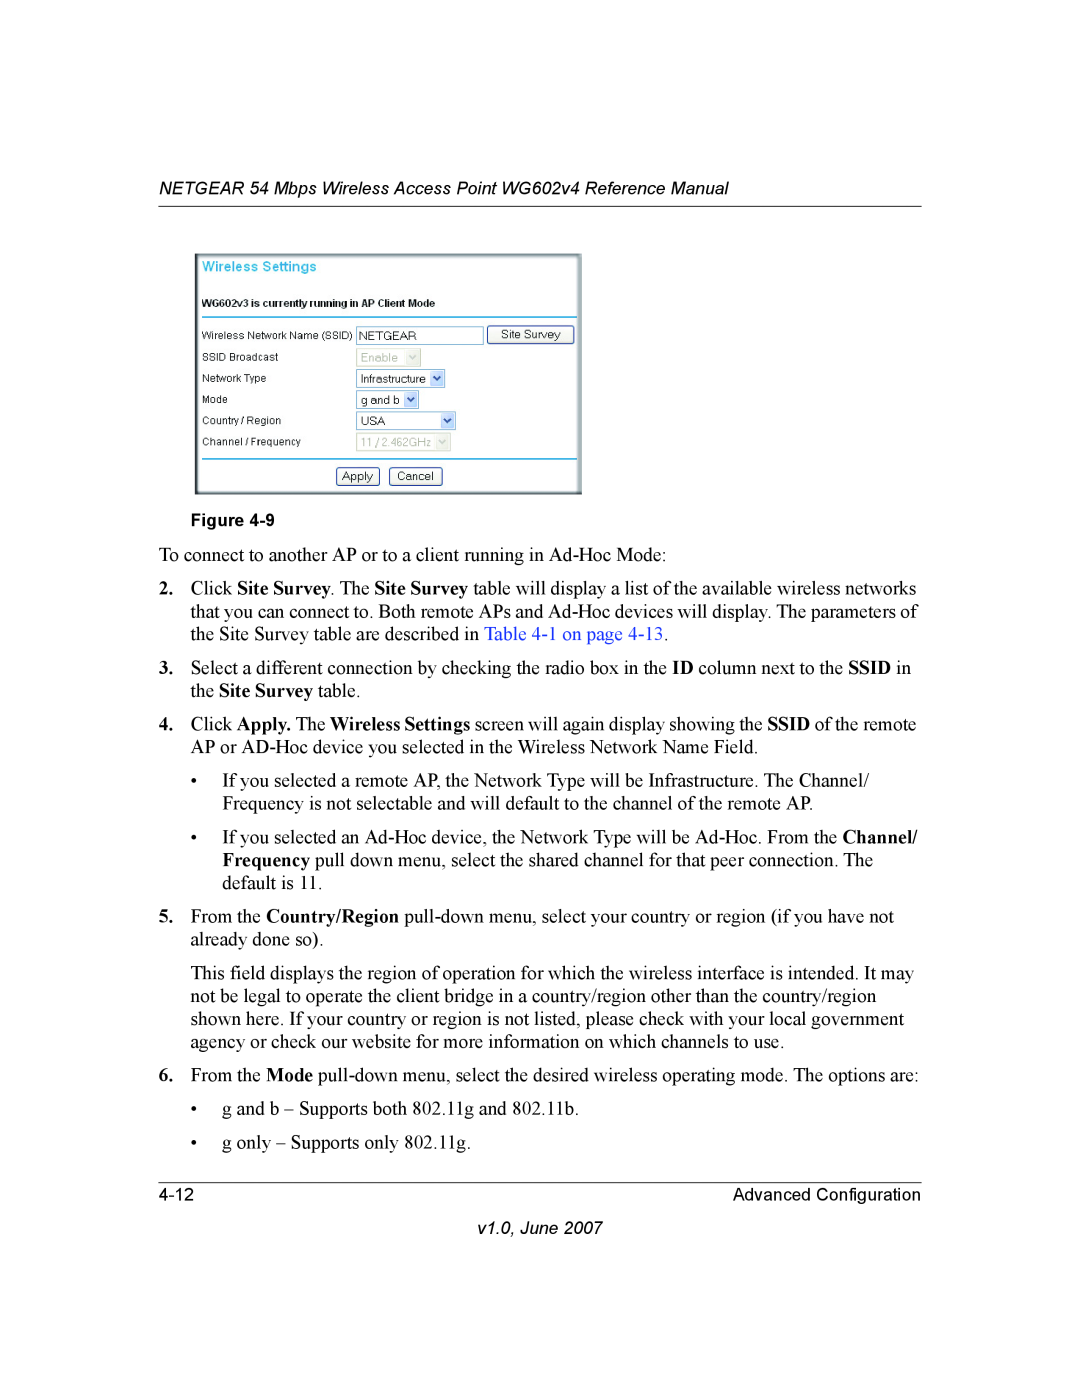 NETGEAR WG602V4 manual To connect to another AP or to a client running in Ad-Hoc Mode 